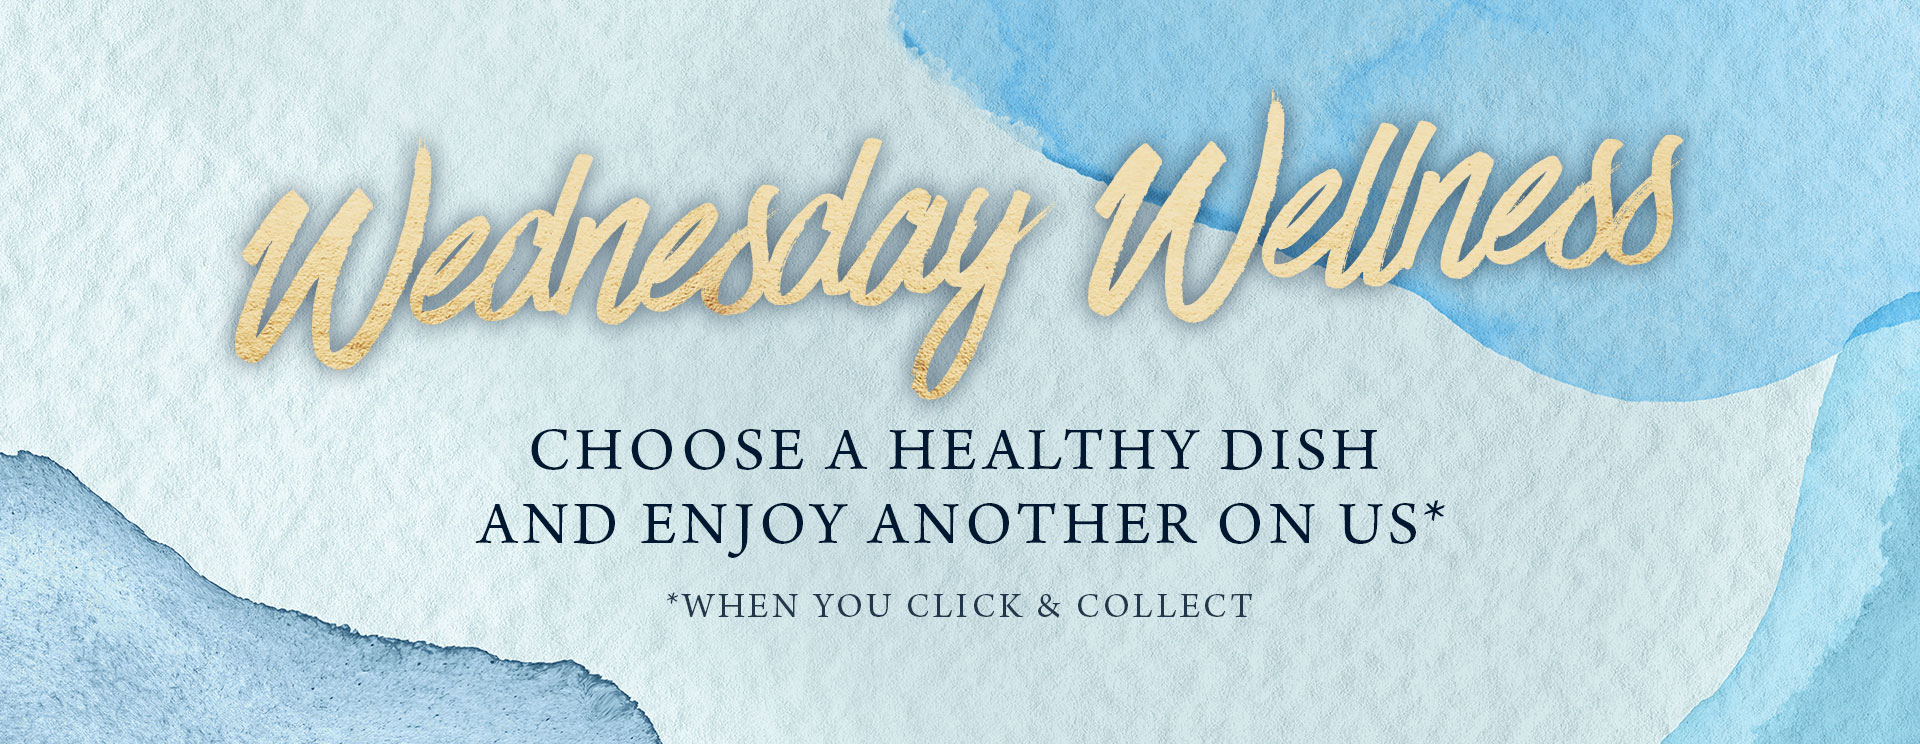 Wednesday Wellness at The Rams Head